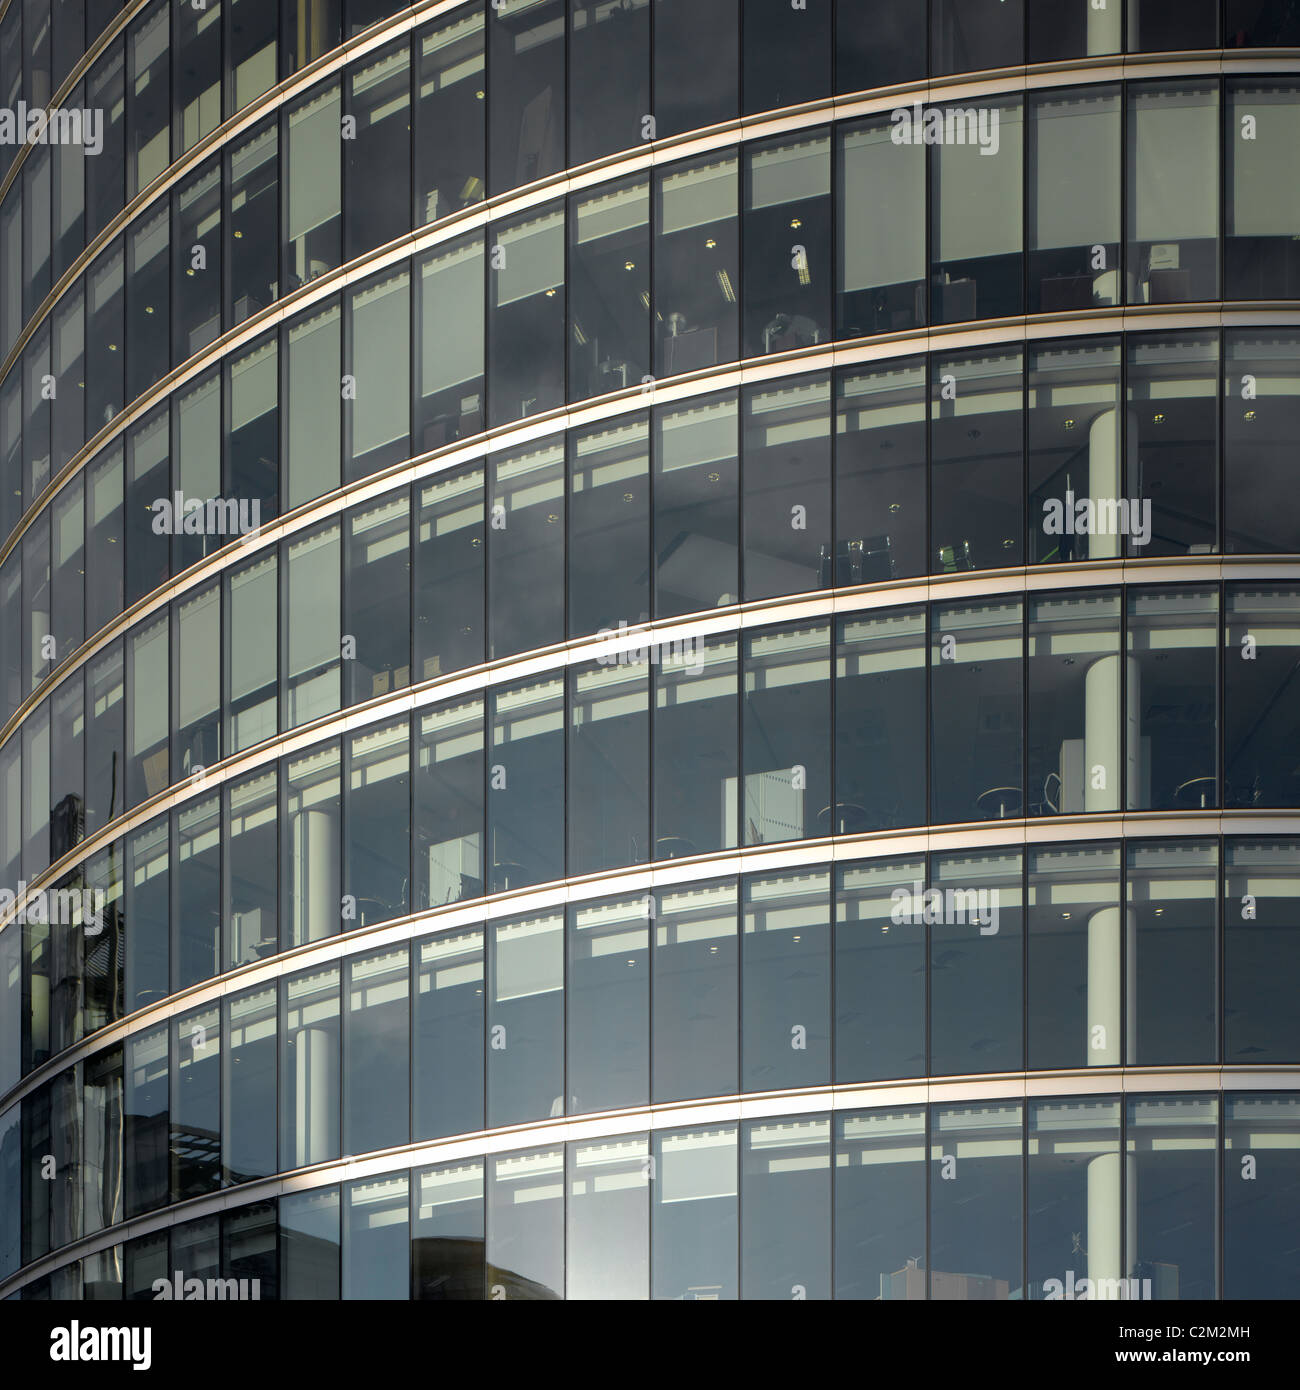 Curved glass facade, London. Stock Photo